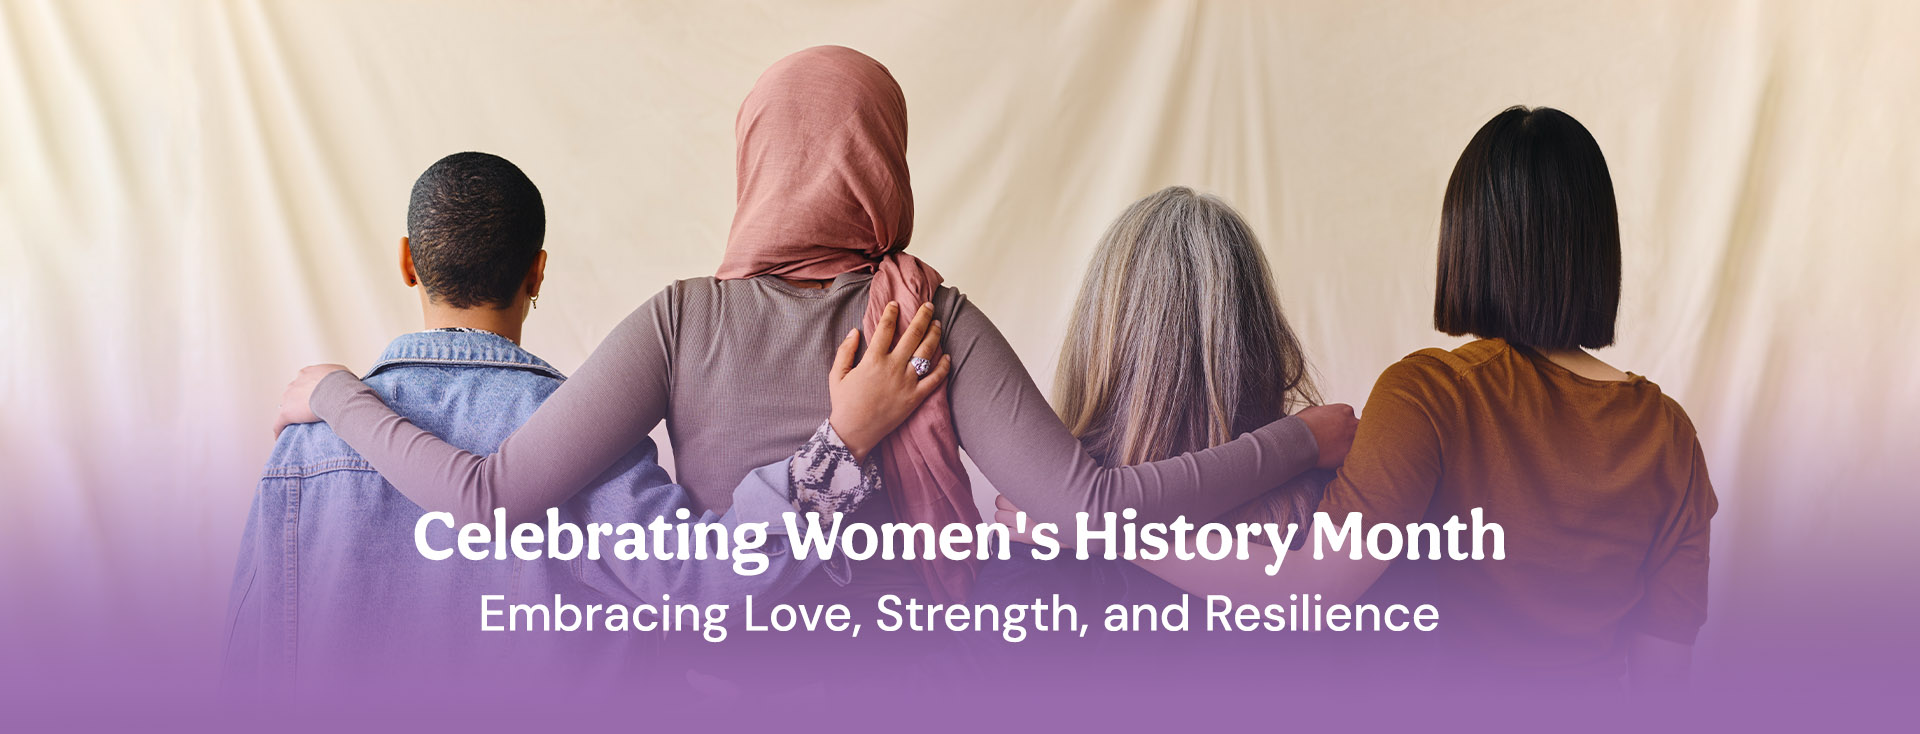 Celebrating Women's History Month: Embracing Love, Strength, and Resilience